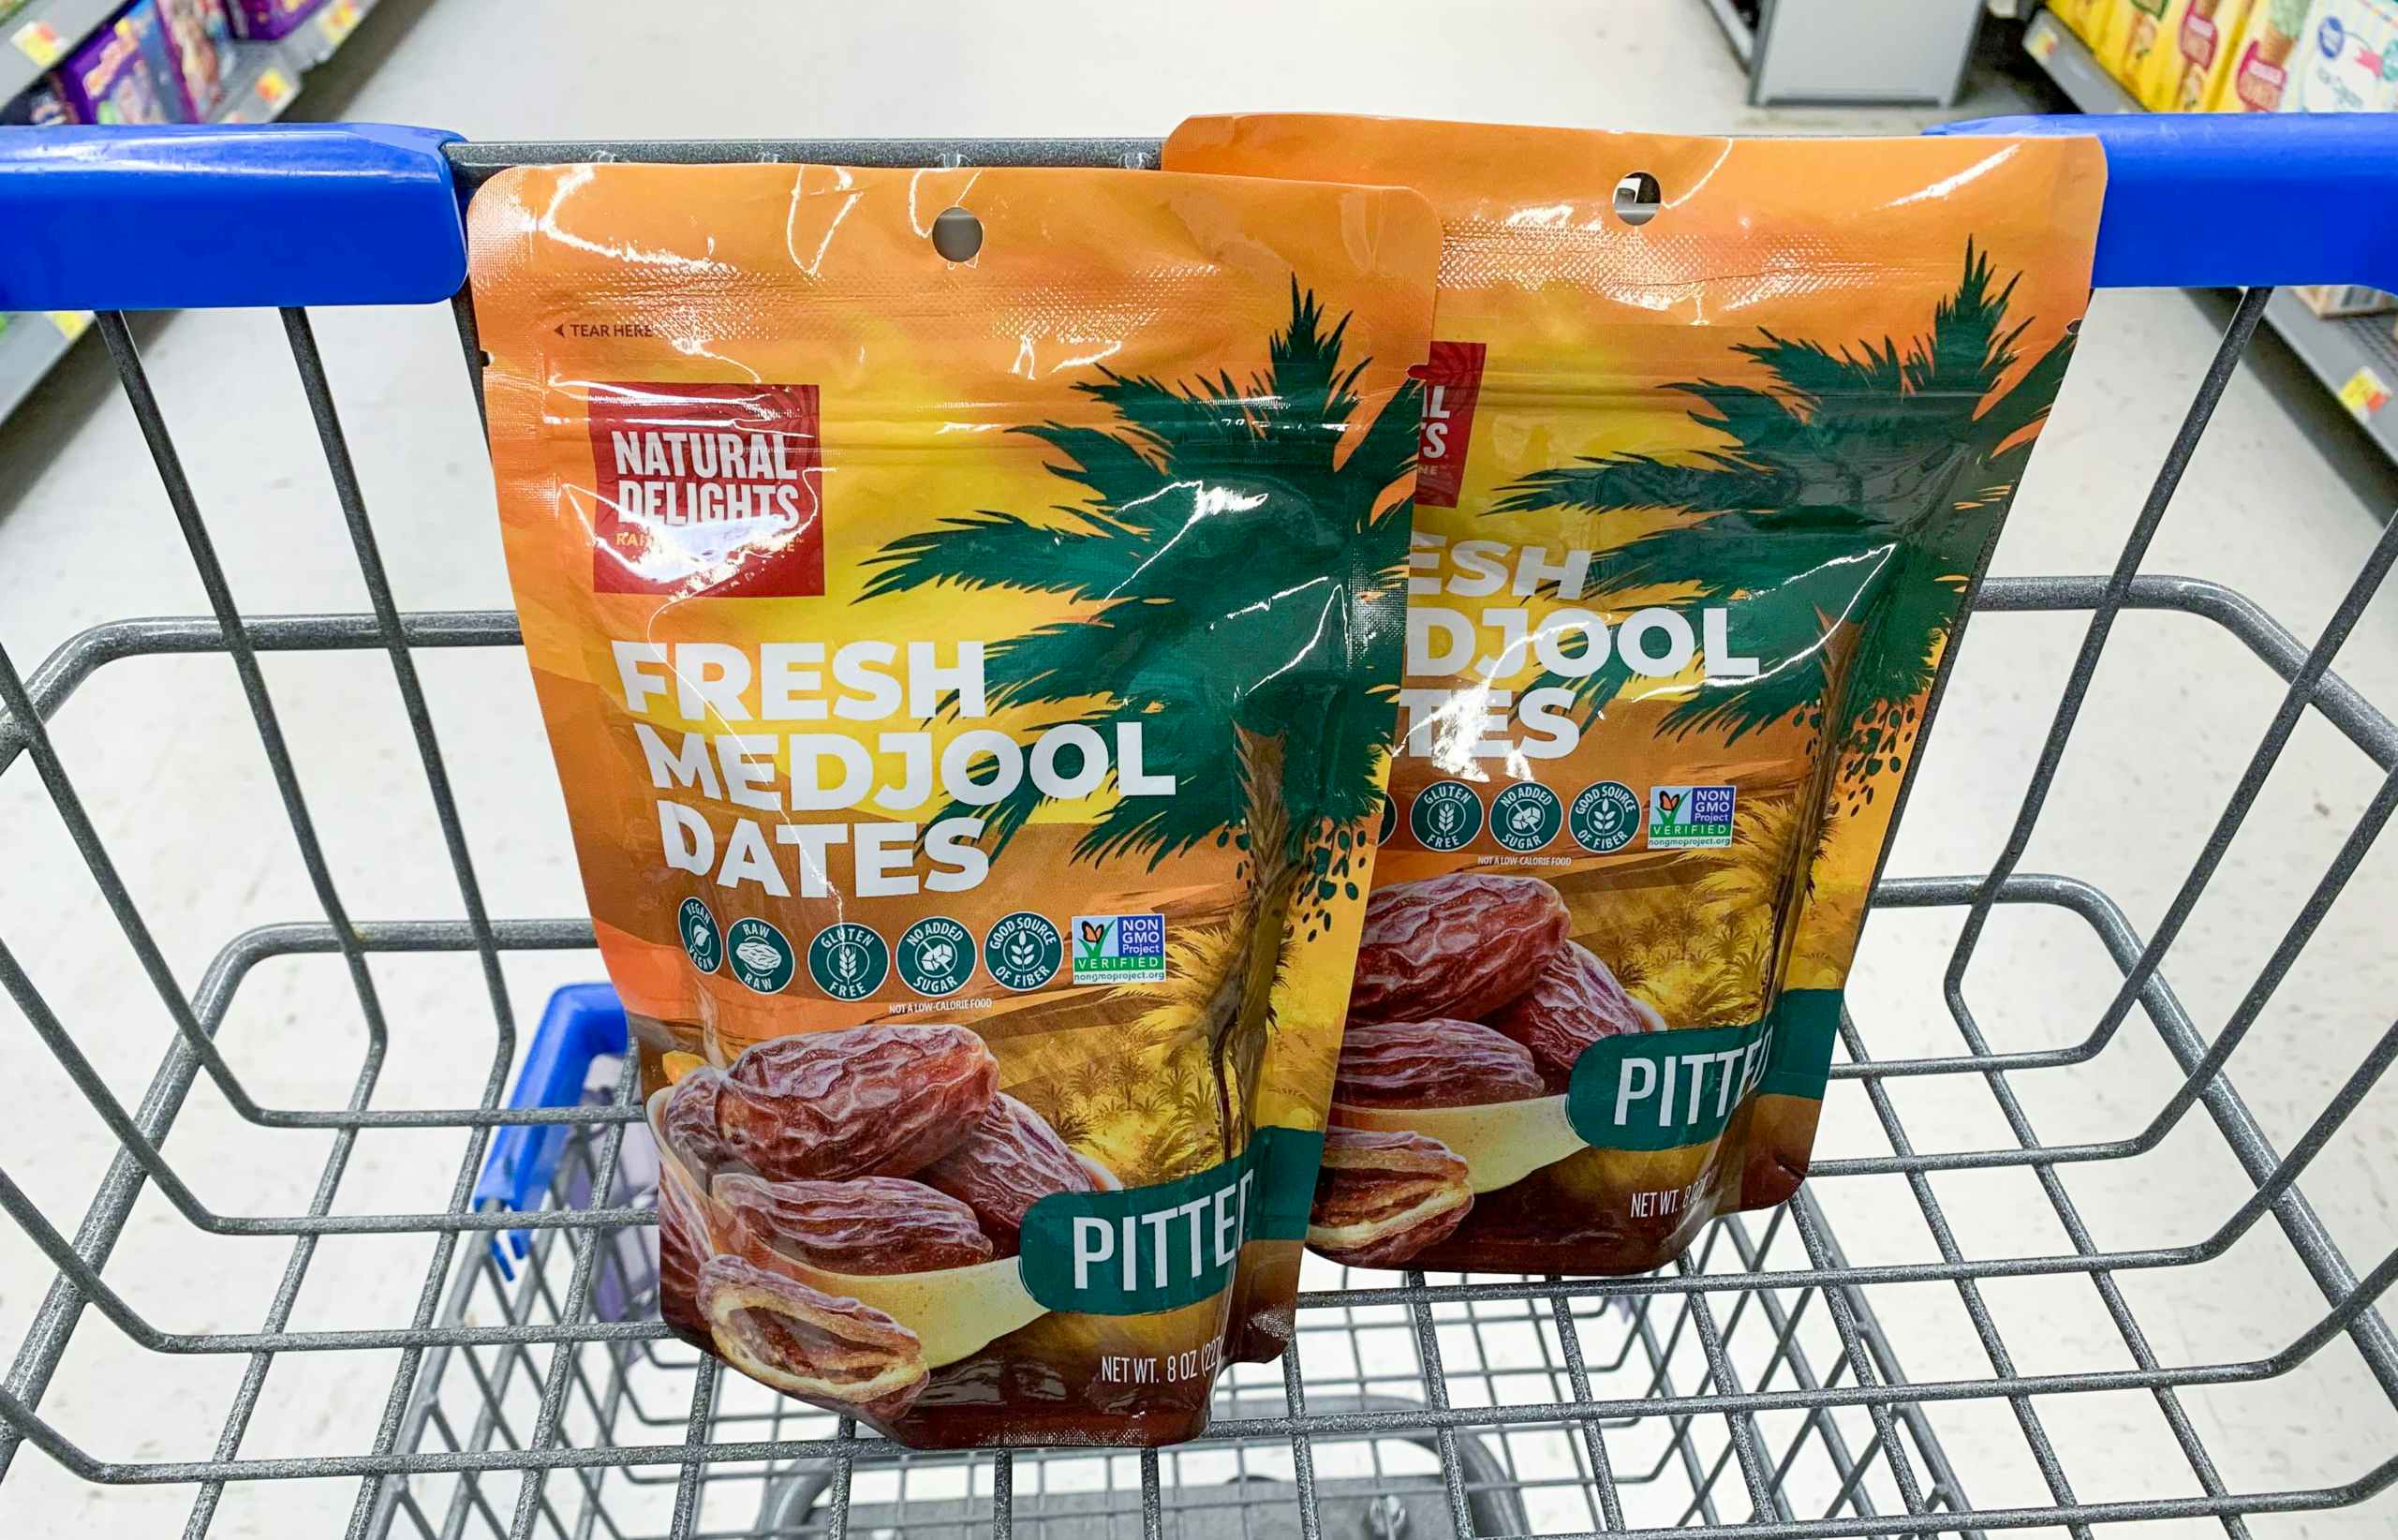 walmart-natural-delights-pitted-medjool-dates-2021